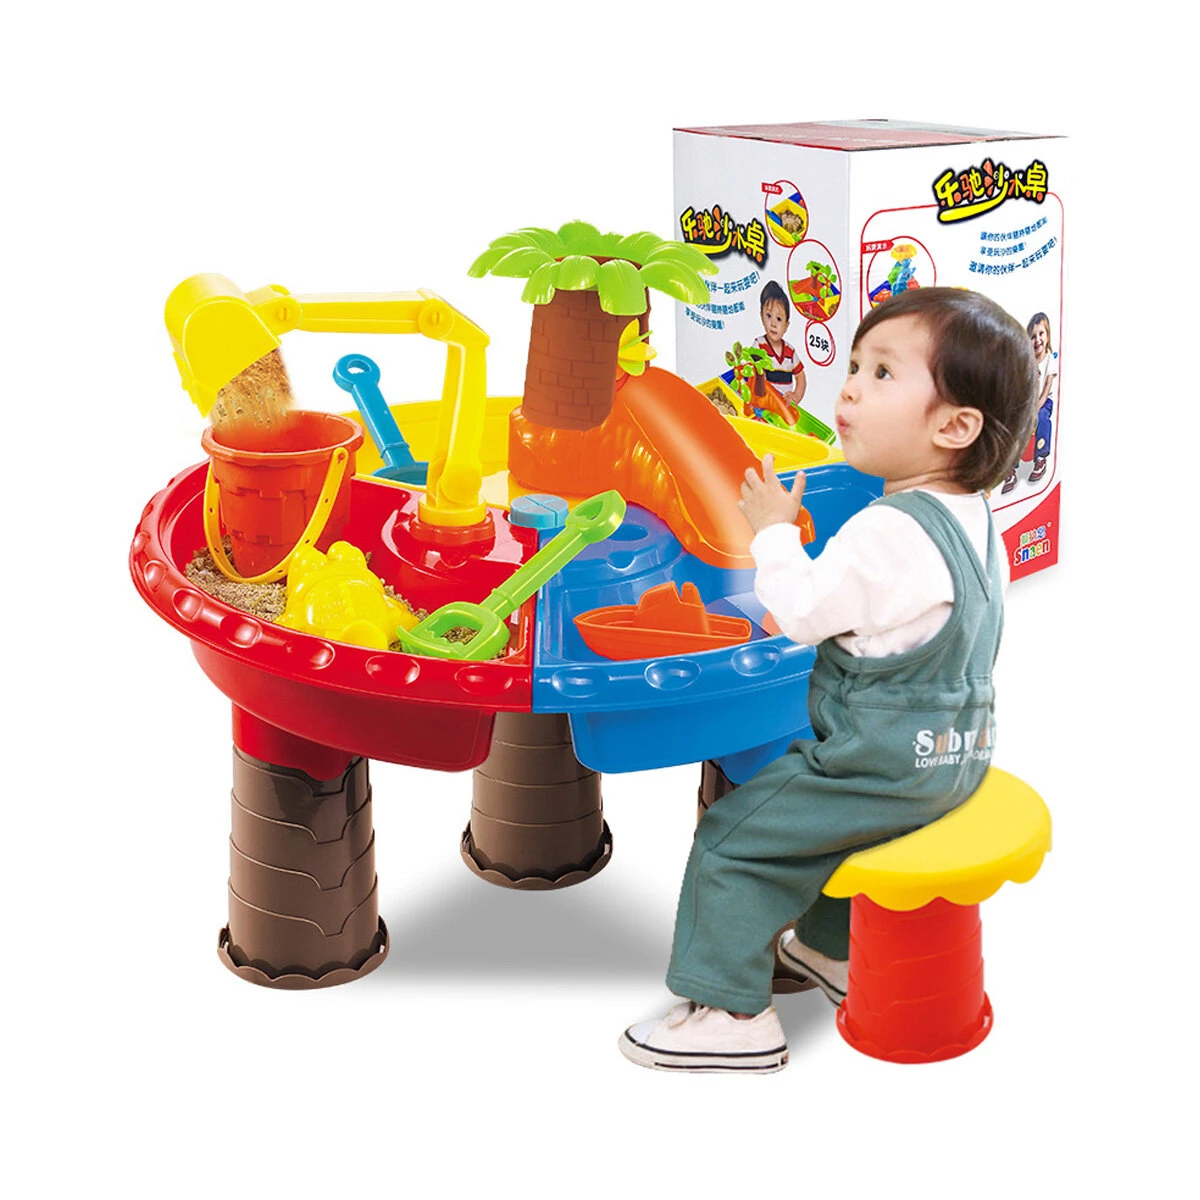 2 in 1 multi-style summer beach sand kids play water digging sandglass play sand tool set toys for kids perfect gift